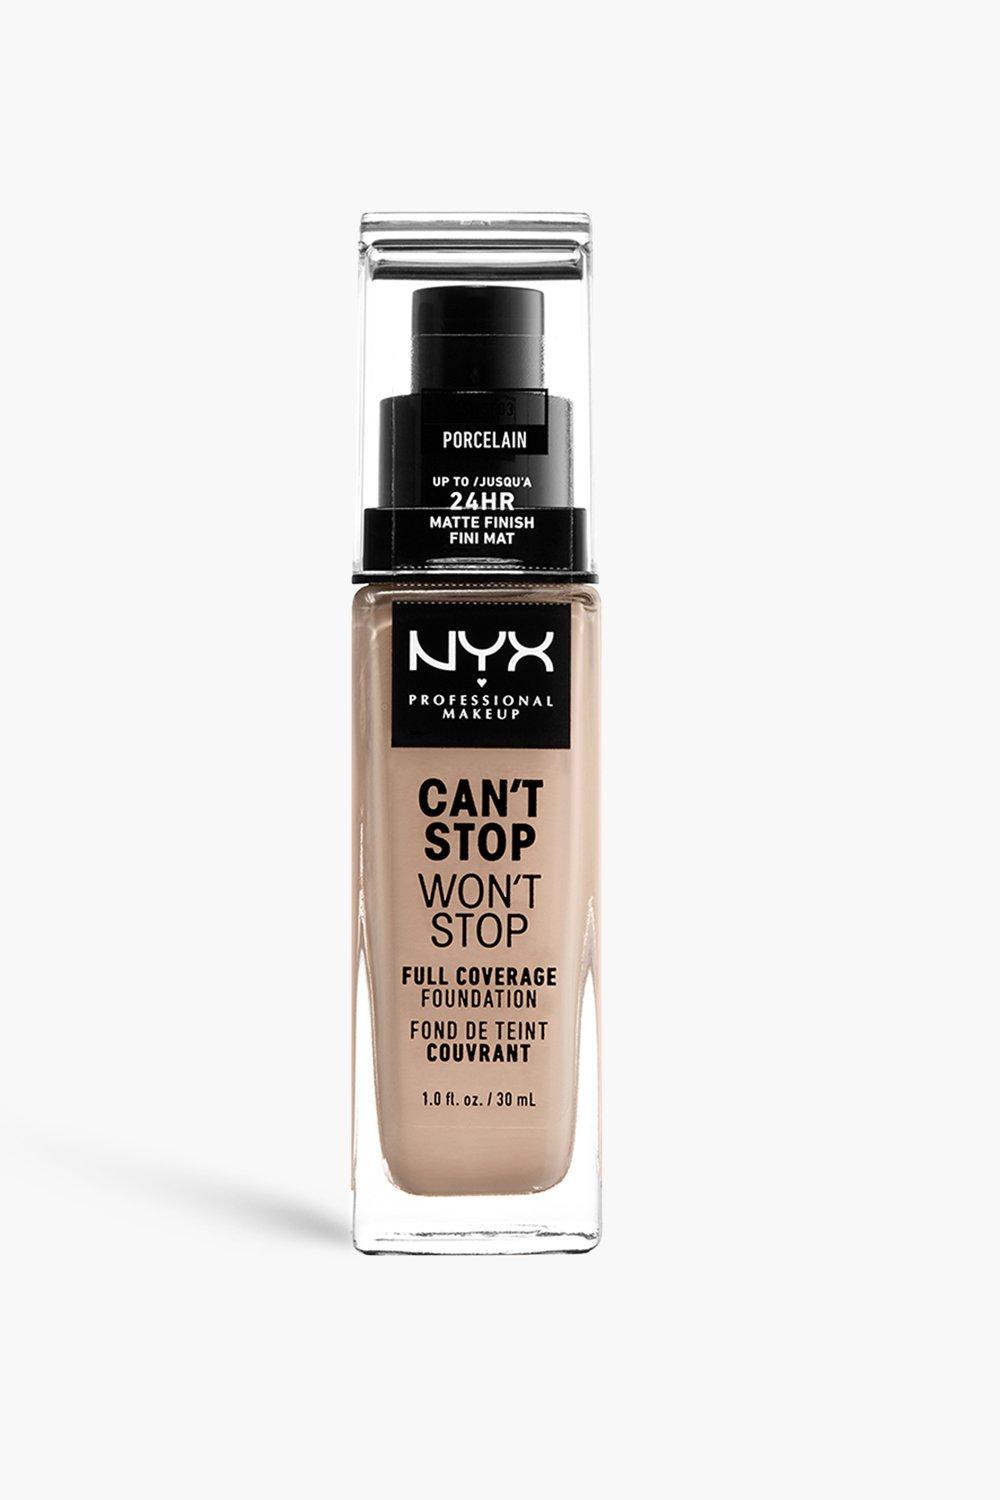 Nyx Professional Makeup Can'T Stop Won'T Stop Full Coverage Foundation, Porcelain